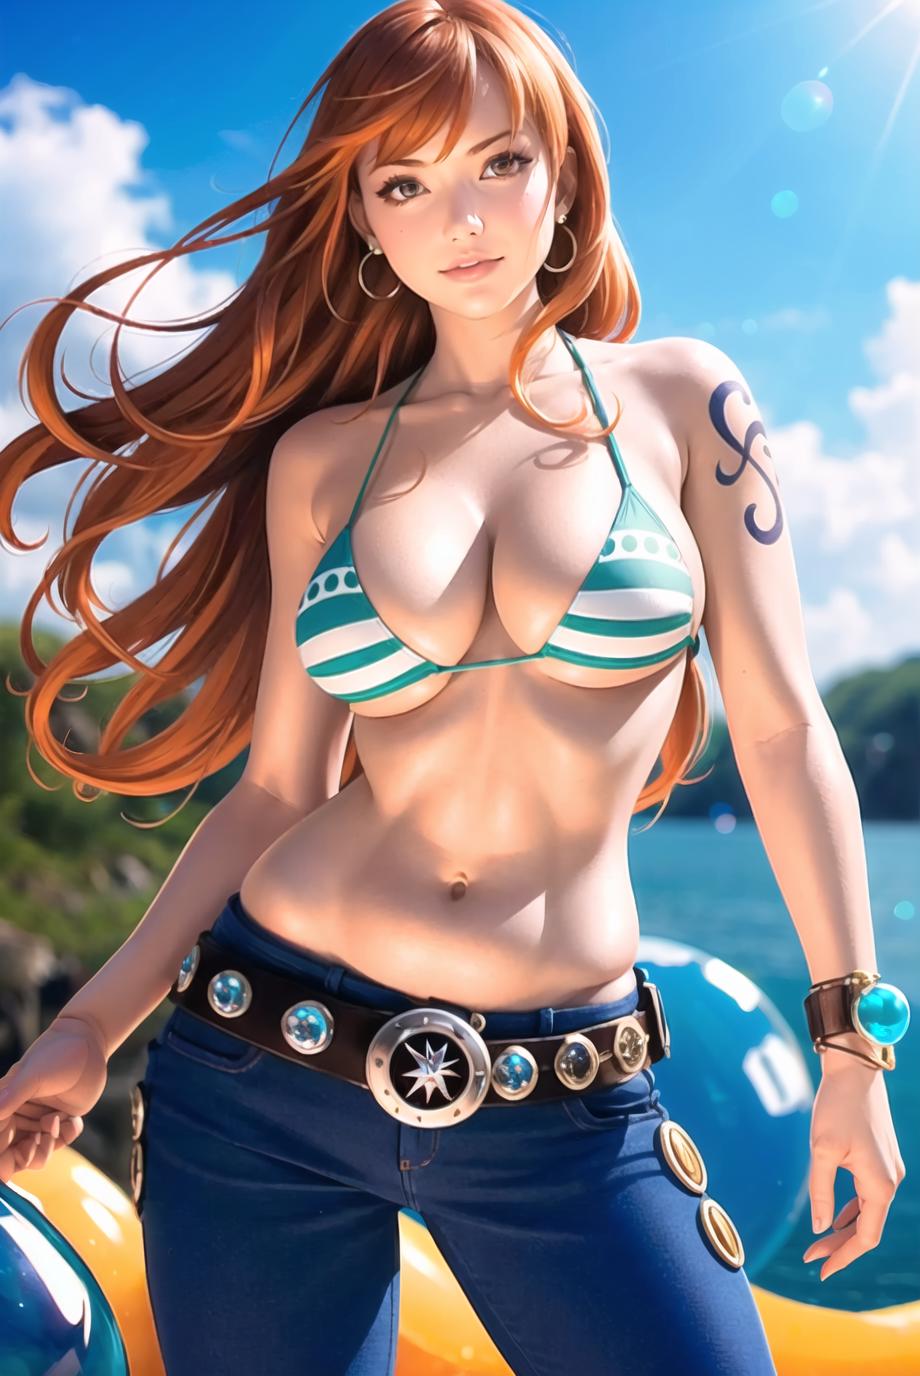 An Anime Cartoon Character with Large Breasts in a Bikini and a Pendant.